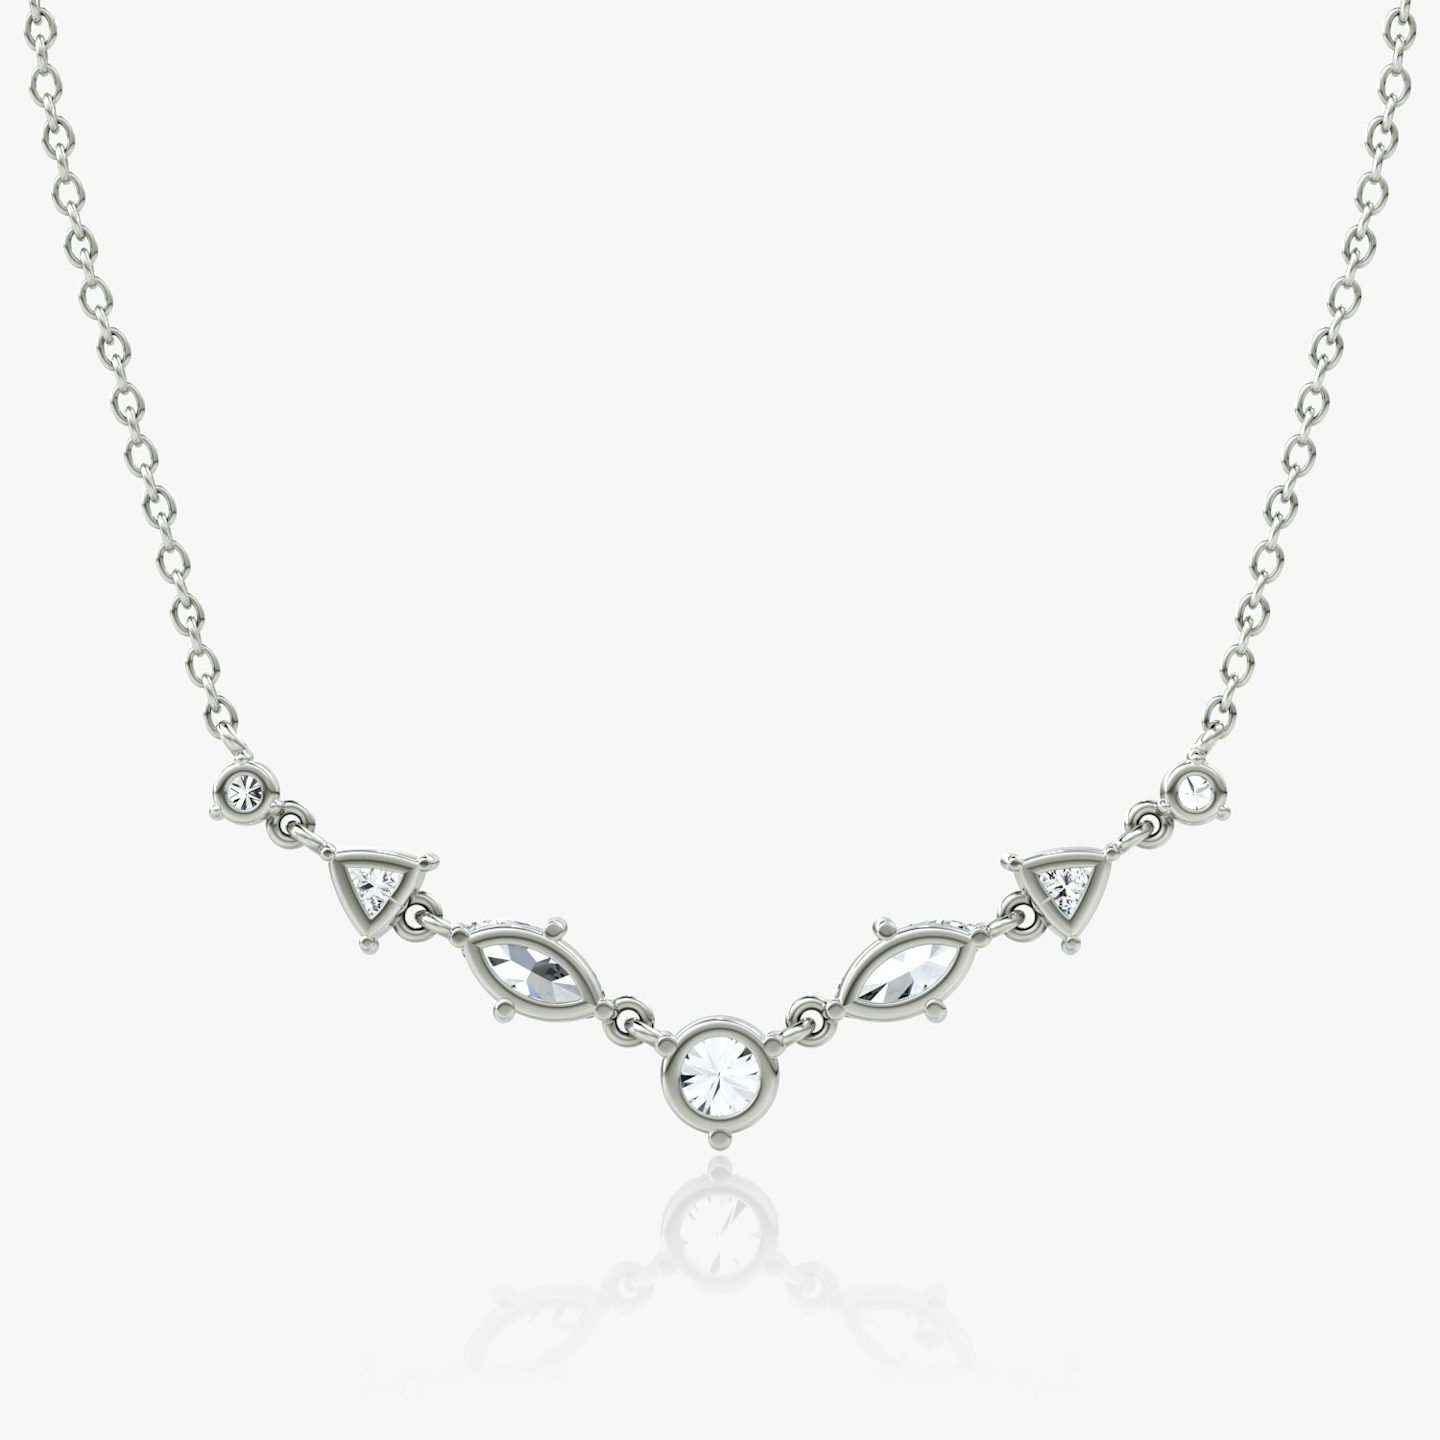 Mixed Shape Linked Tennis Necklace | 14k | White Gold | diamondtype: round-brilliant+marquise+trillion | chainLength: 16-18